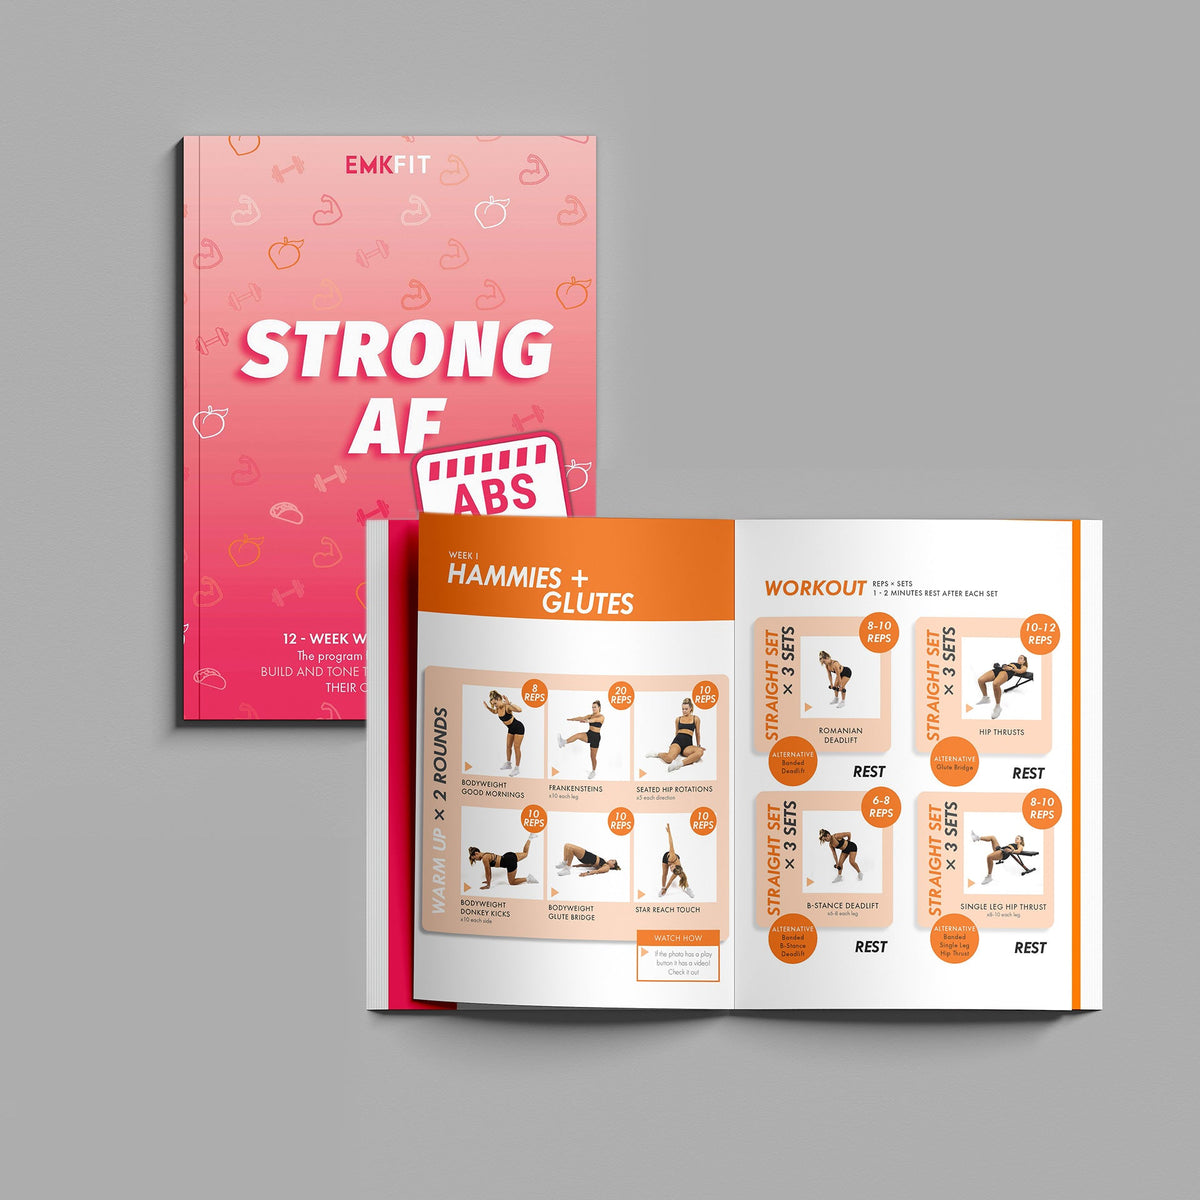 STRONG AF BUNDLE - ABS AND BOOTY + BANDS